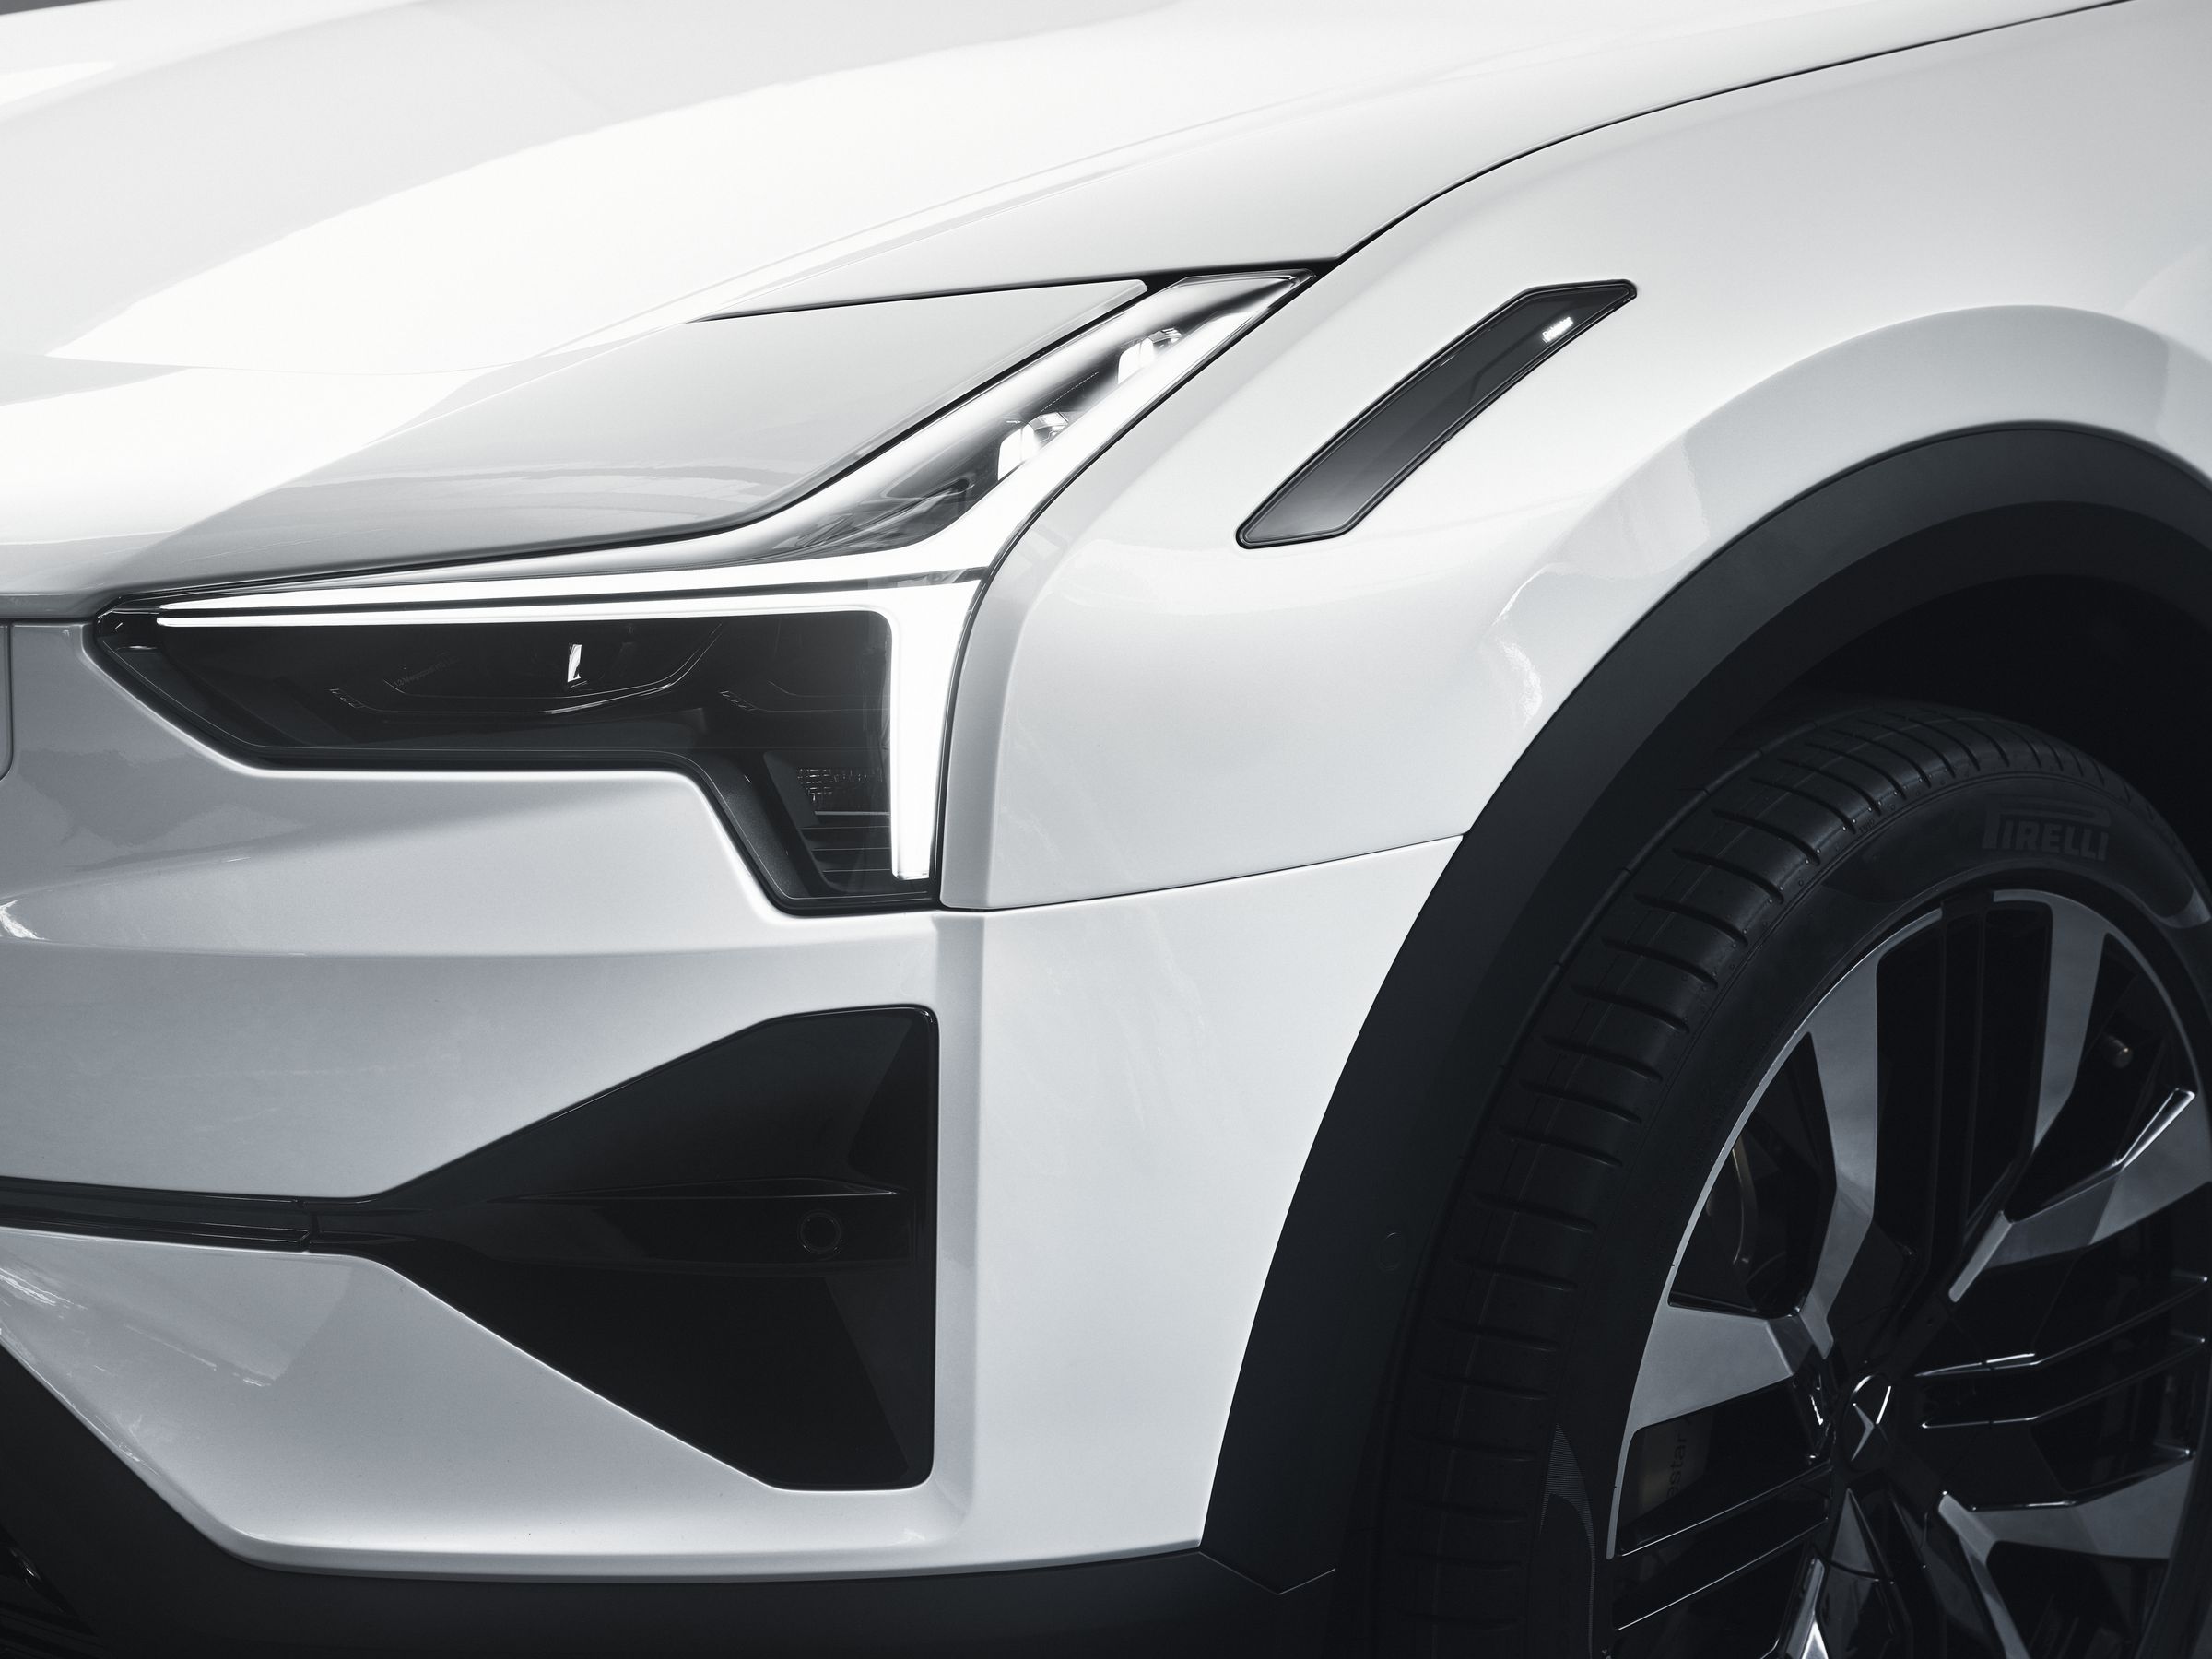 “Thor’s hammer”-style headlights are another indication of Polestar’s Volvo roots.